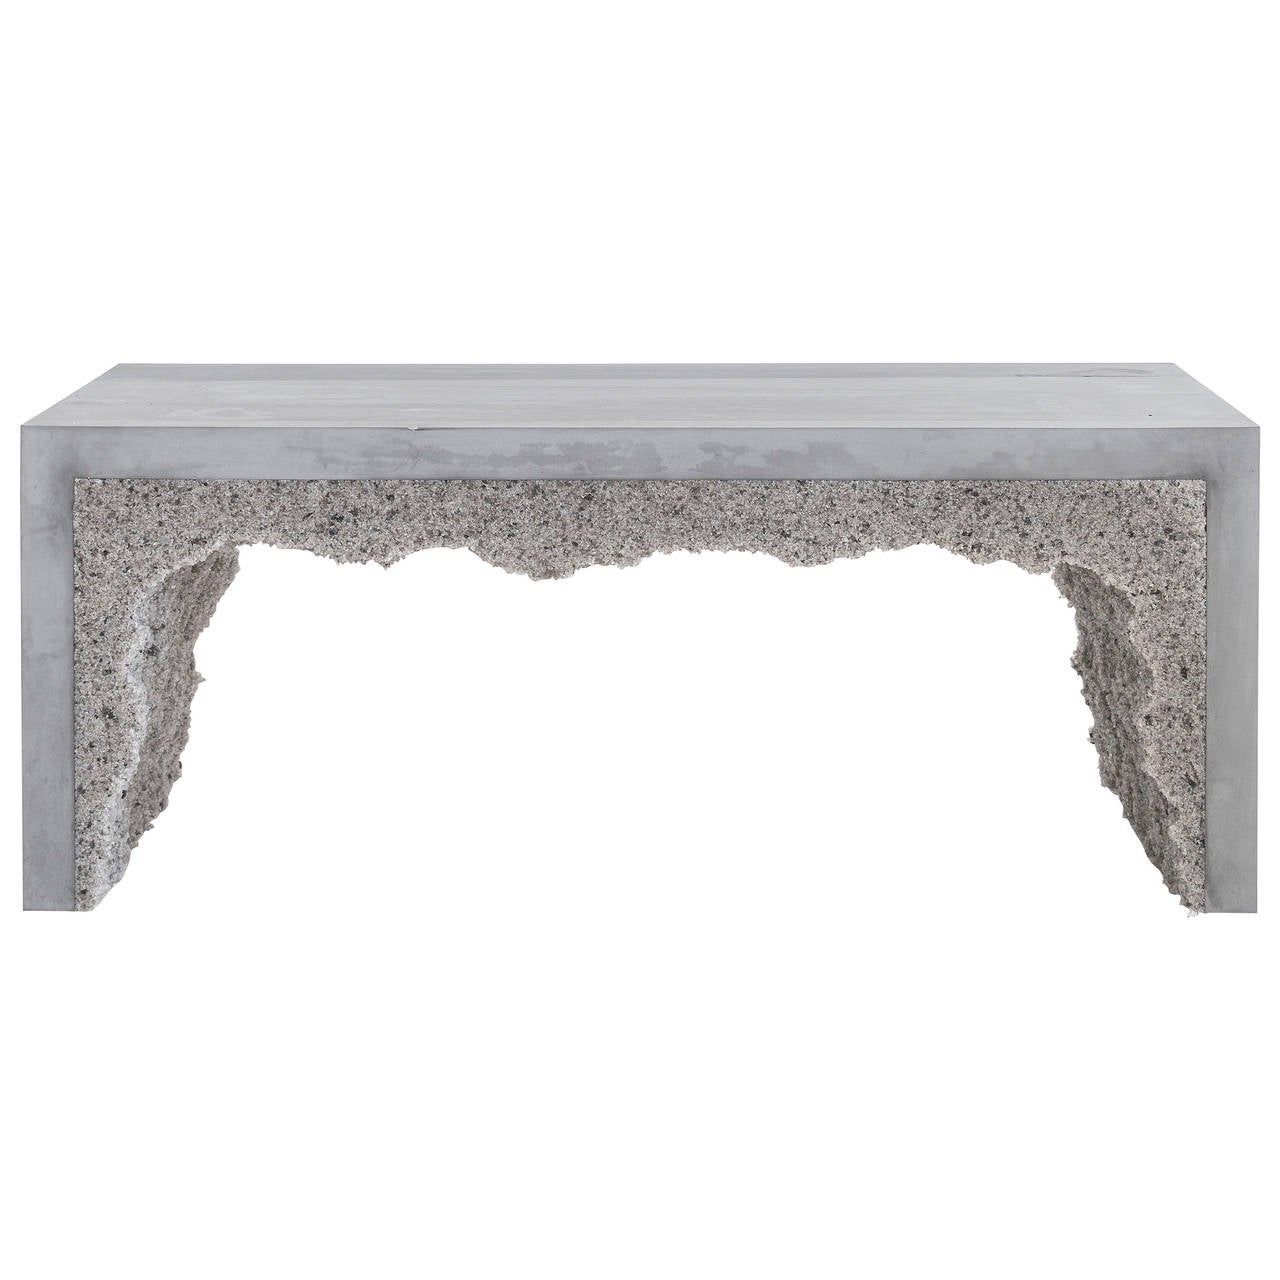 This made-to-order bench consists of a hand-dyed grey cement exterior and a grey rock salt interior. The salt is packed by hand within the cement in an organic nature. 8-10 Weeks. 
Custom options available, please inquire with the studio.